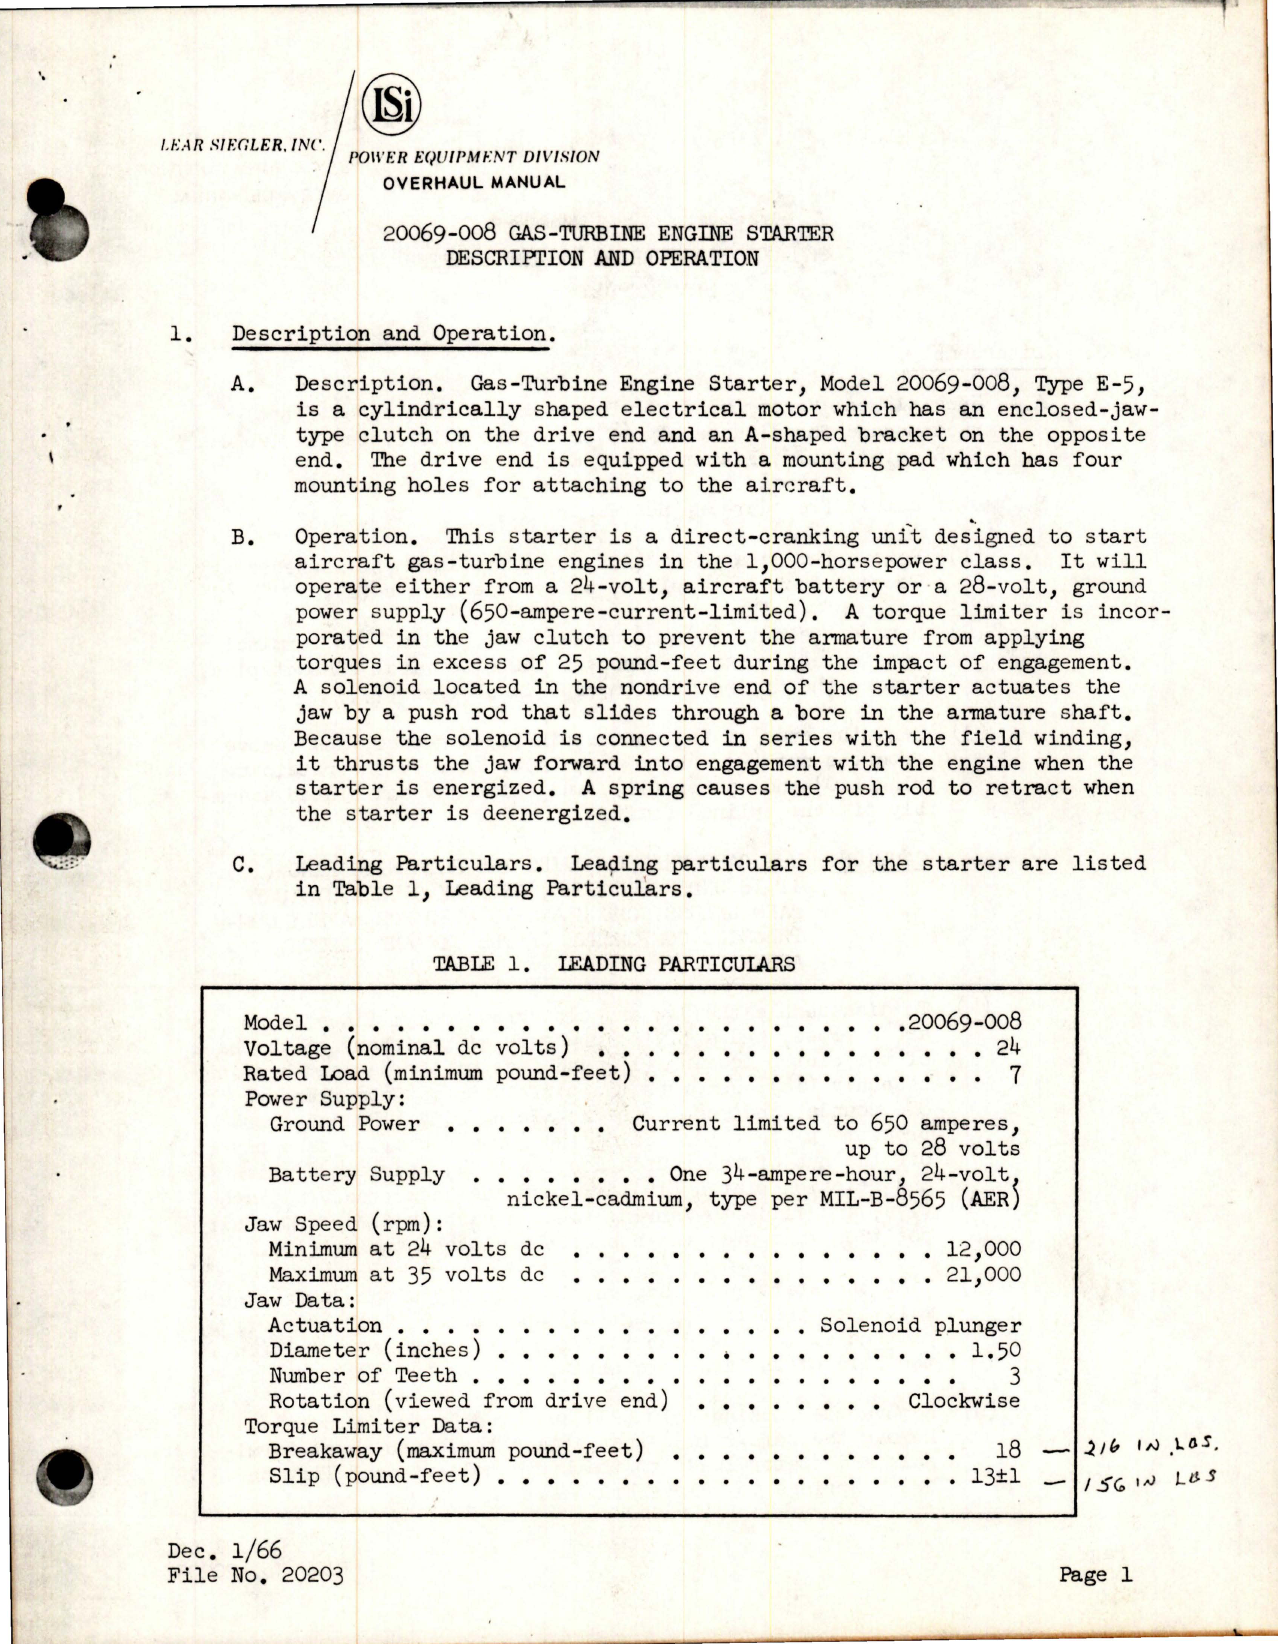 Sample page 5 from AirCorps Library document: Overhaul Instructions with Parts Breakdown for Gas-Turbine Engine Starter - Models 20069-005, 20069-008 